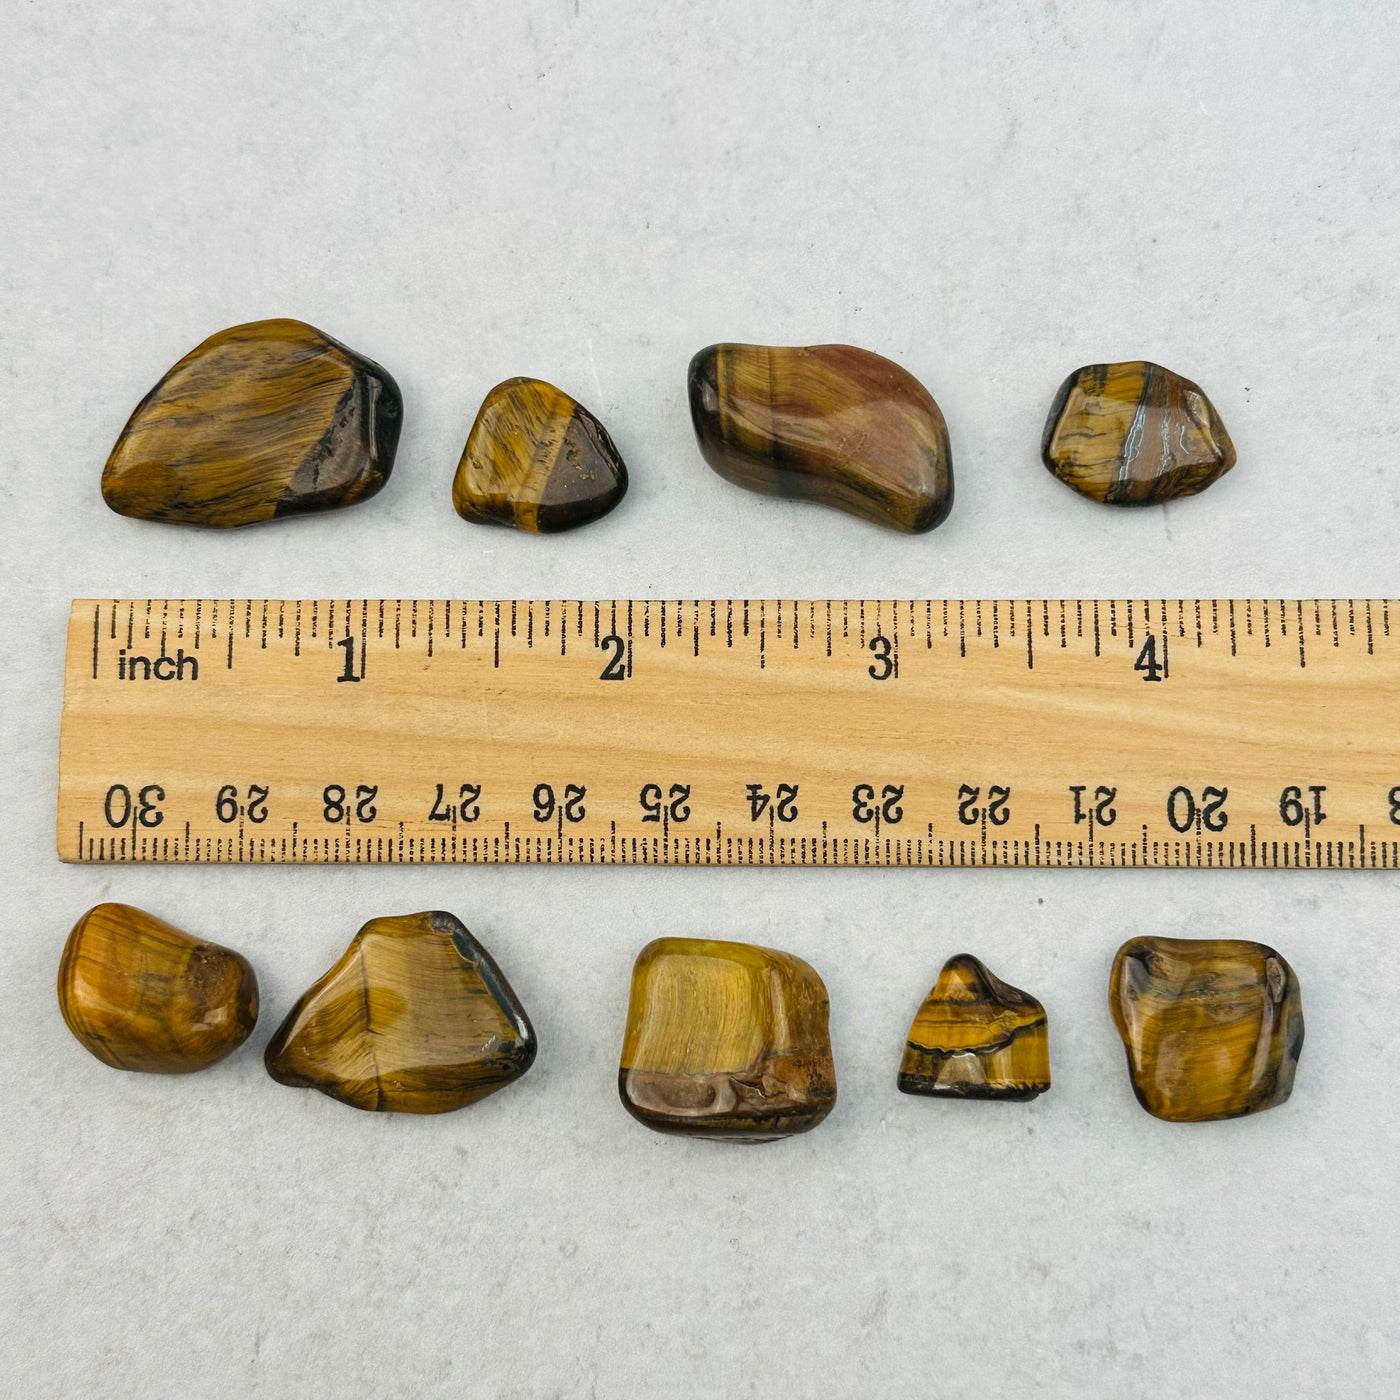 tumbled stones next to a ruler for size reference 